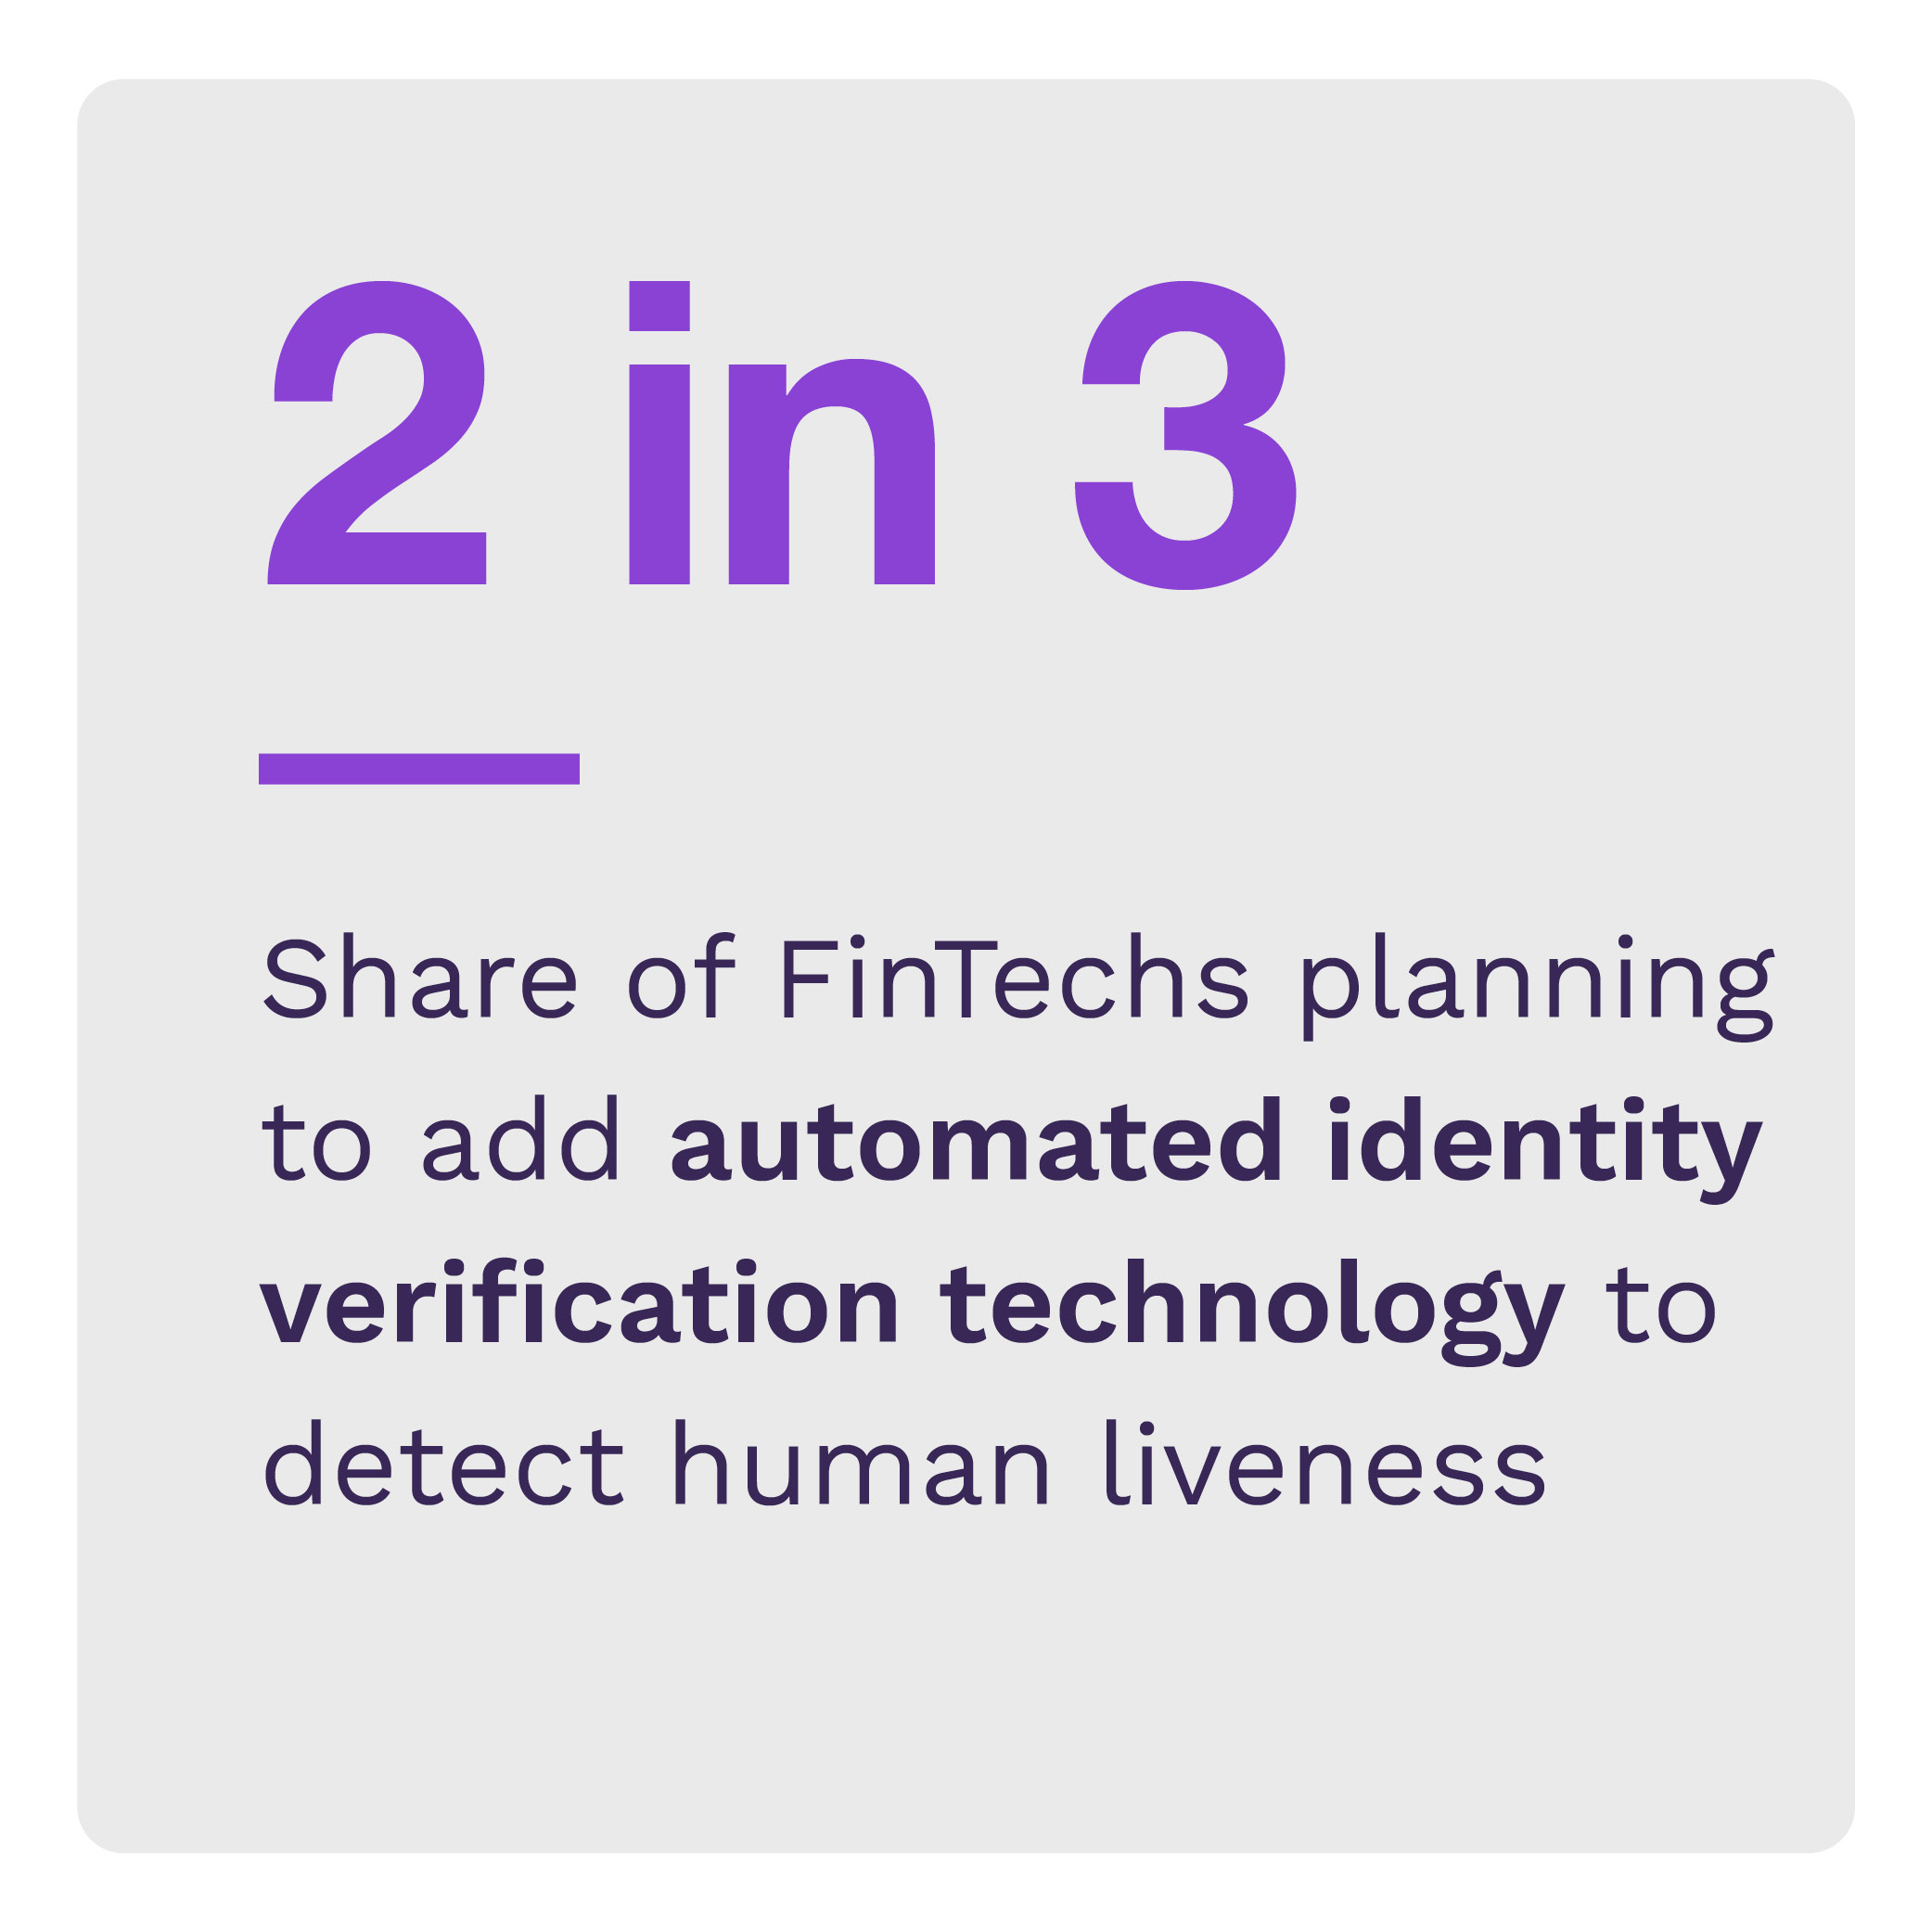 2 in 3: Share of FinTechs planning to add automated identity verification technology to detect human liveness